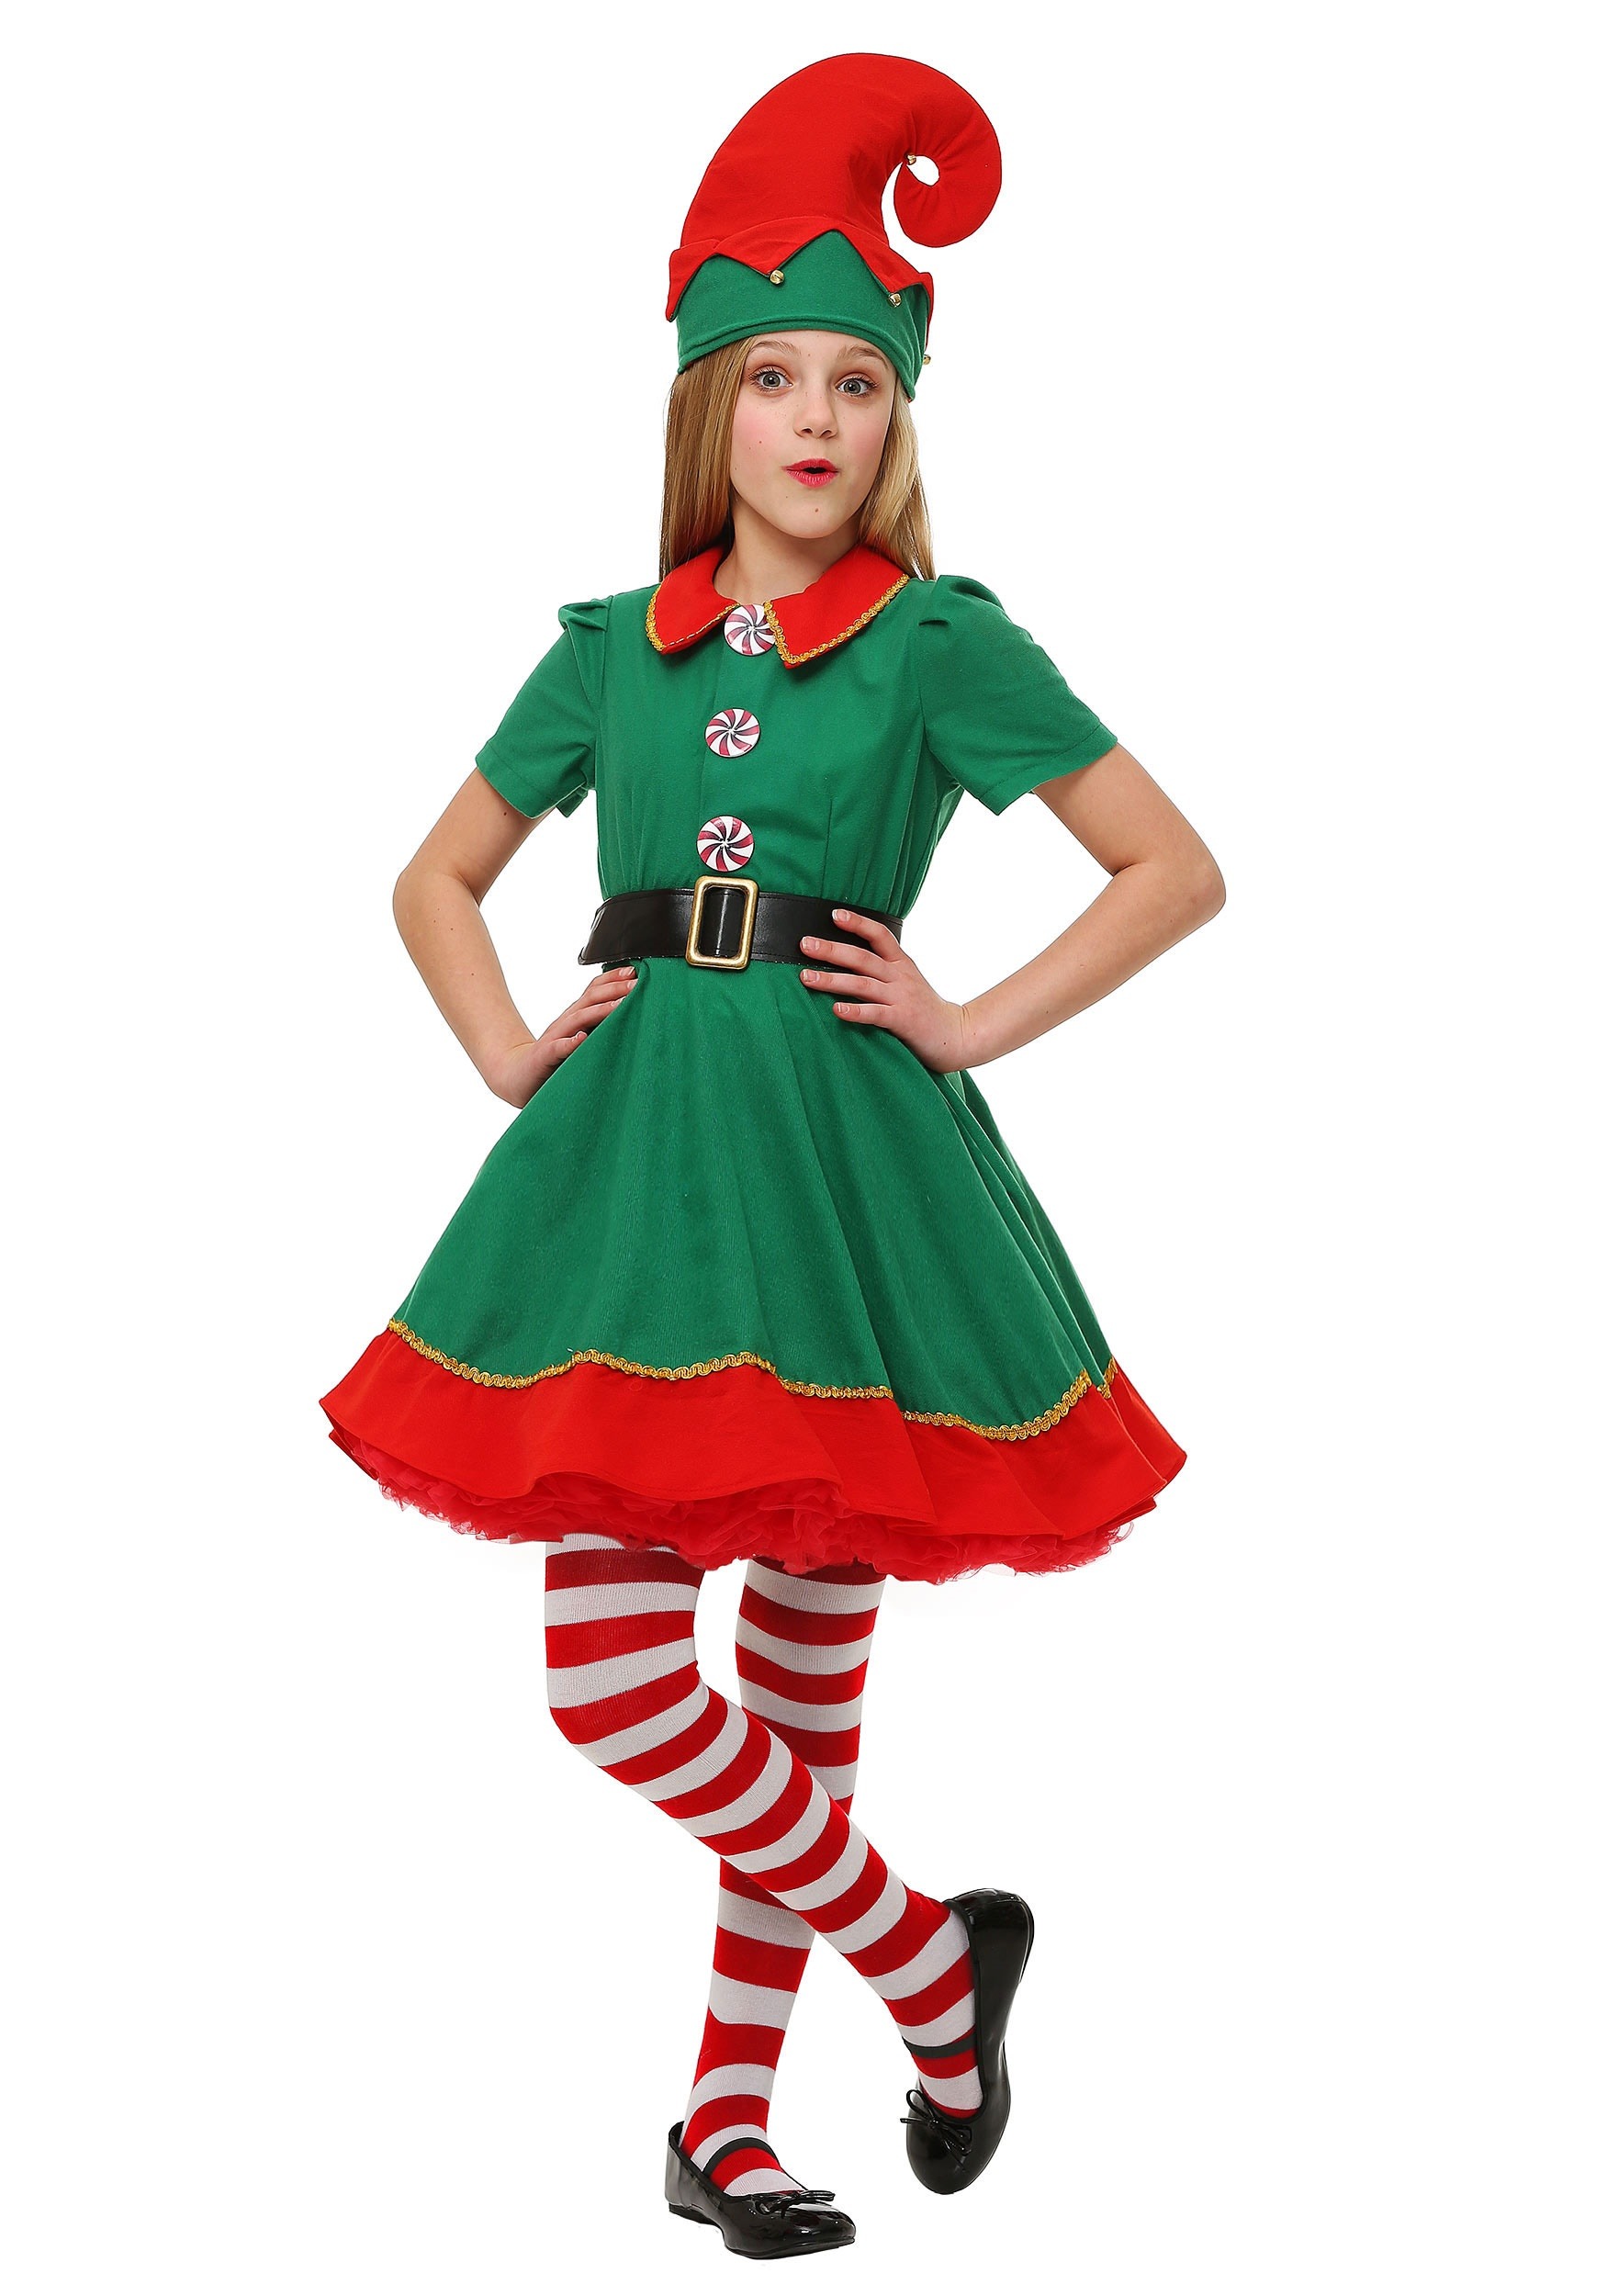 Photos - Fancy Dress FUN Costumes Holiday Elf Costume for Girls Green/Red FUN2177CH